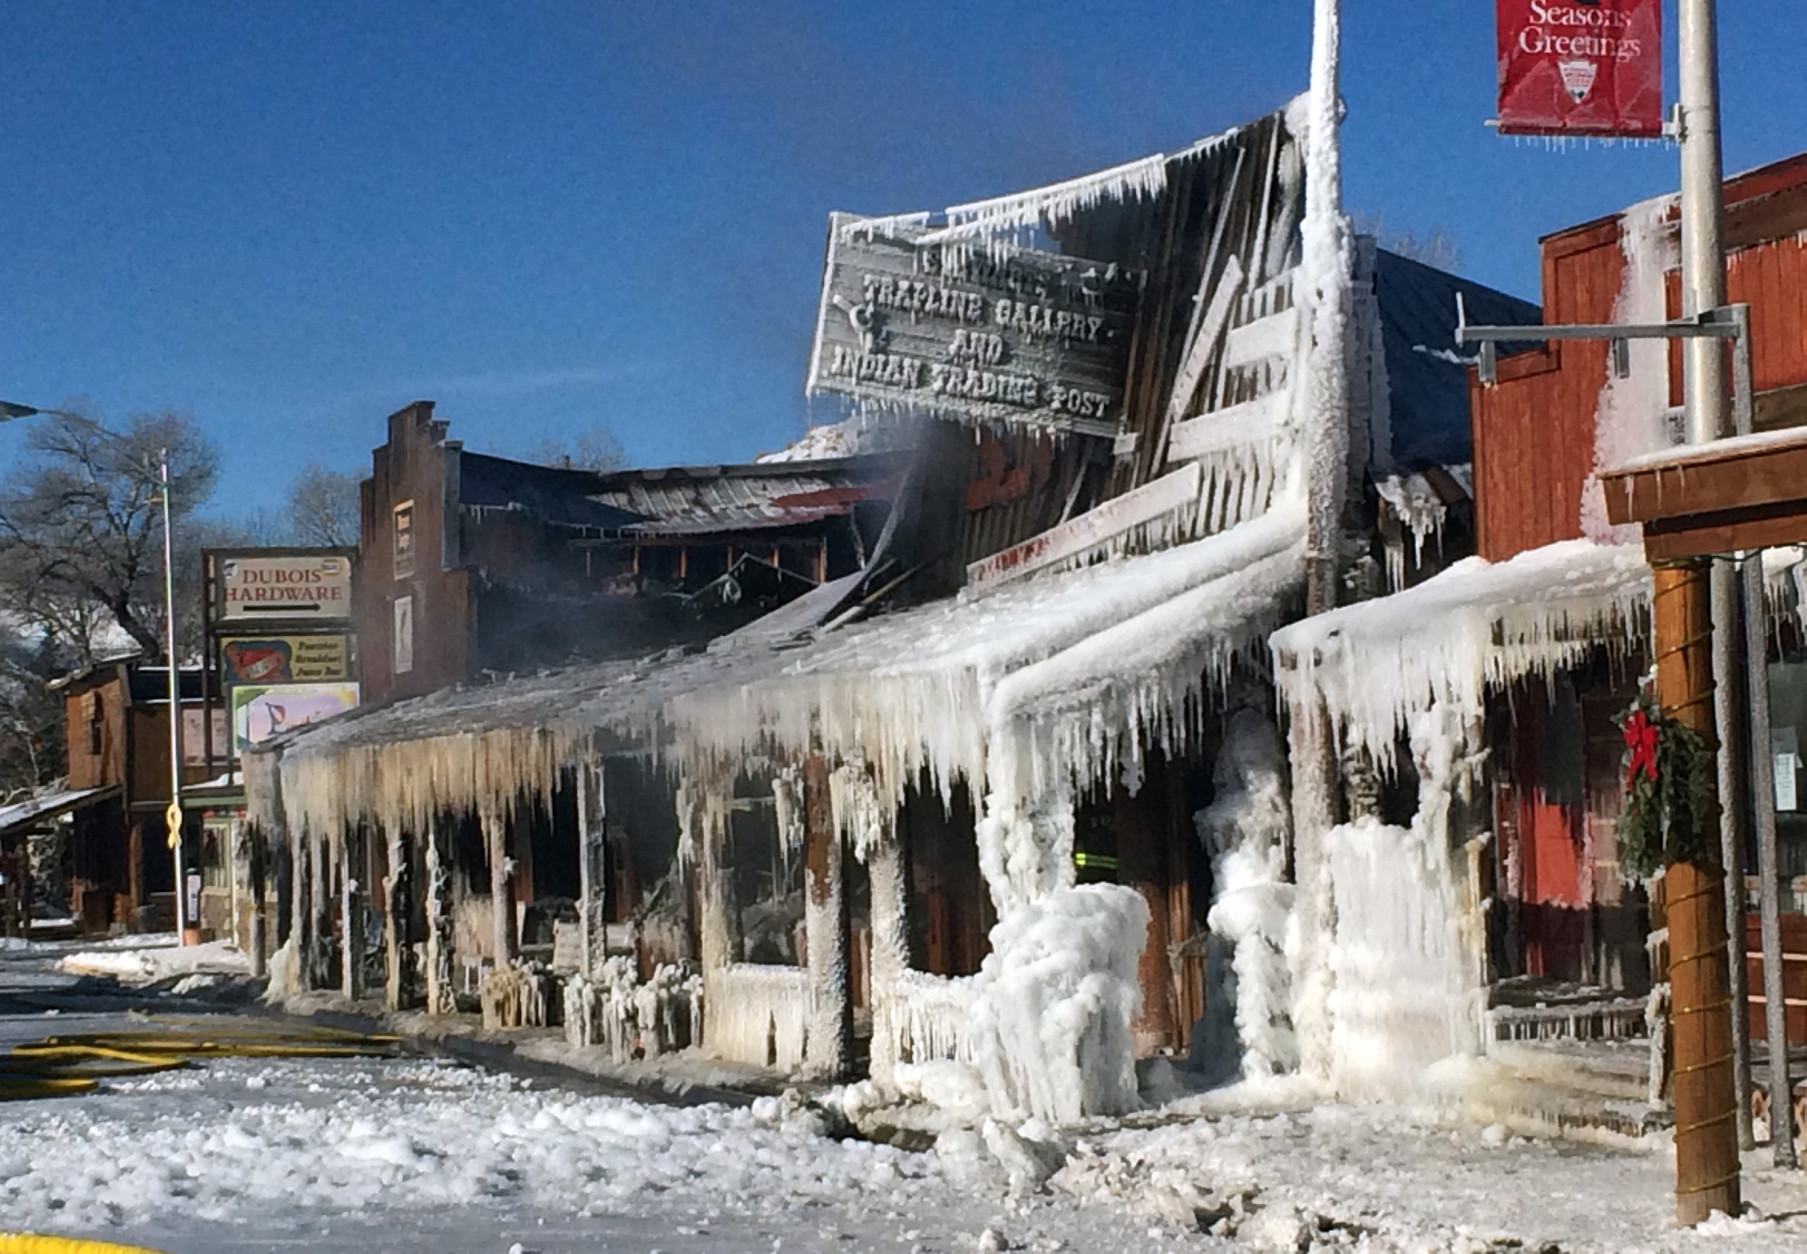 This Wednesday, Dec. 31, 2014 photo provided by Kate Wiltshire shows the frozen remains of building after a raging fire that swept through Dubois, Wyo. on Tuesday night. Huge flames ripped through the historic buildings in the picturesque western Wyoming town as firefighters contended with sub-zero temperatures that froze their hoses and other equipment. Four buildings containing more than a dozen businesses were destroyed, but Mayor Twila Blakeman credited firefighters with keeping the flames from spreading even further. (AP Photo/Kate Wiltshire)